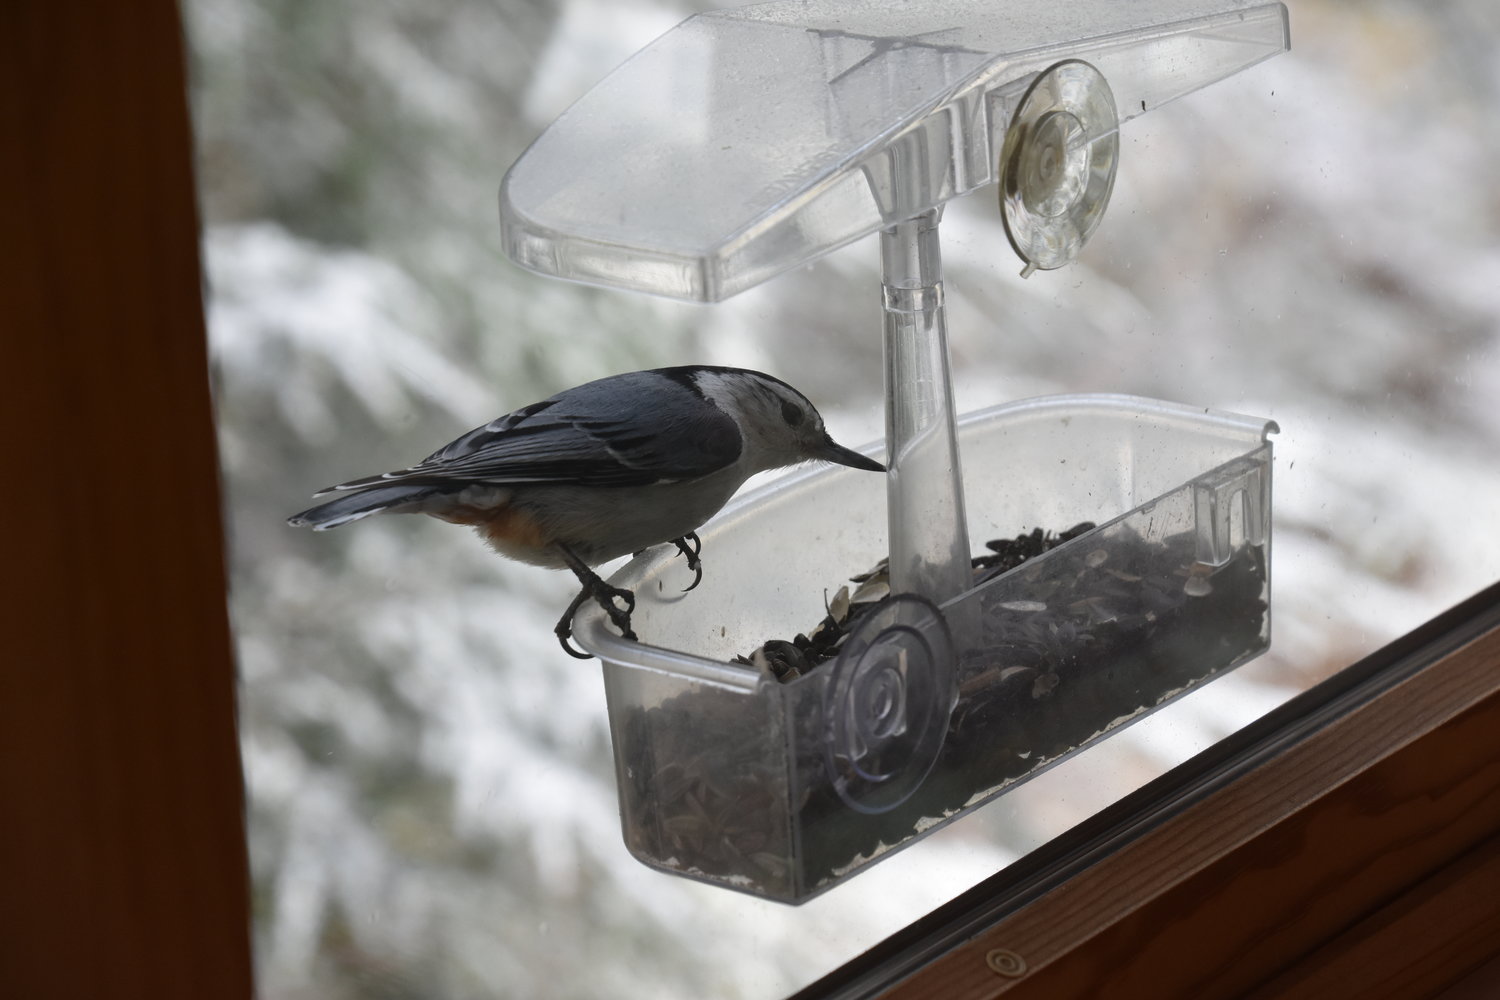 Opportunities abound to participate in citizen science projects pertaining to birds like this white-breasted nuthatch. Project Feeder Watch (www.feederwatch.org) is ongoing through Friday, April 9. (Also see www.celebrateurbanbirds.org.) Take part in the Great Backyard Bird Count from Friday to Monday, February 12 to 15. Learn more at www.birdcount.org. All are projects of the outstanding Cornell Lab of Ornithology (www.birds.cornell.edu/home).